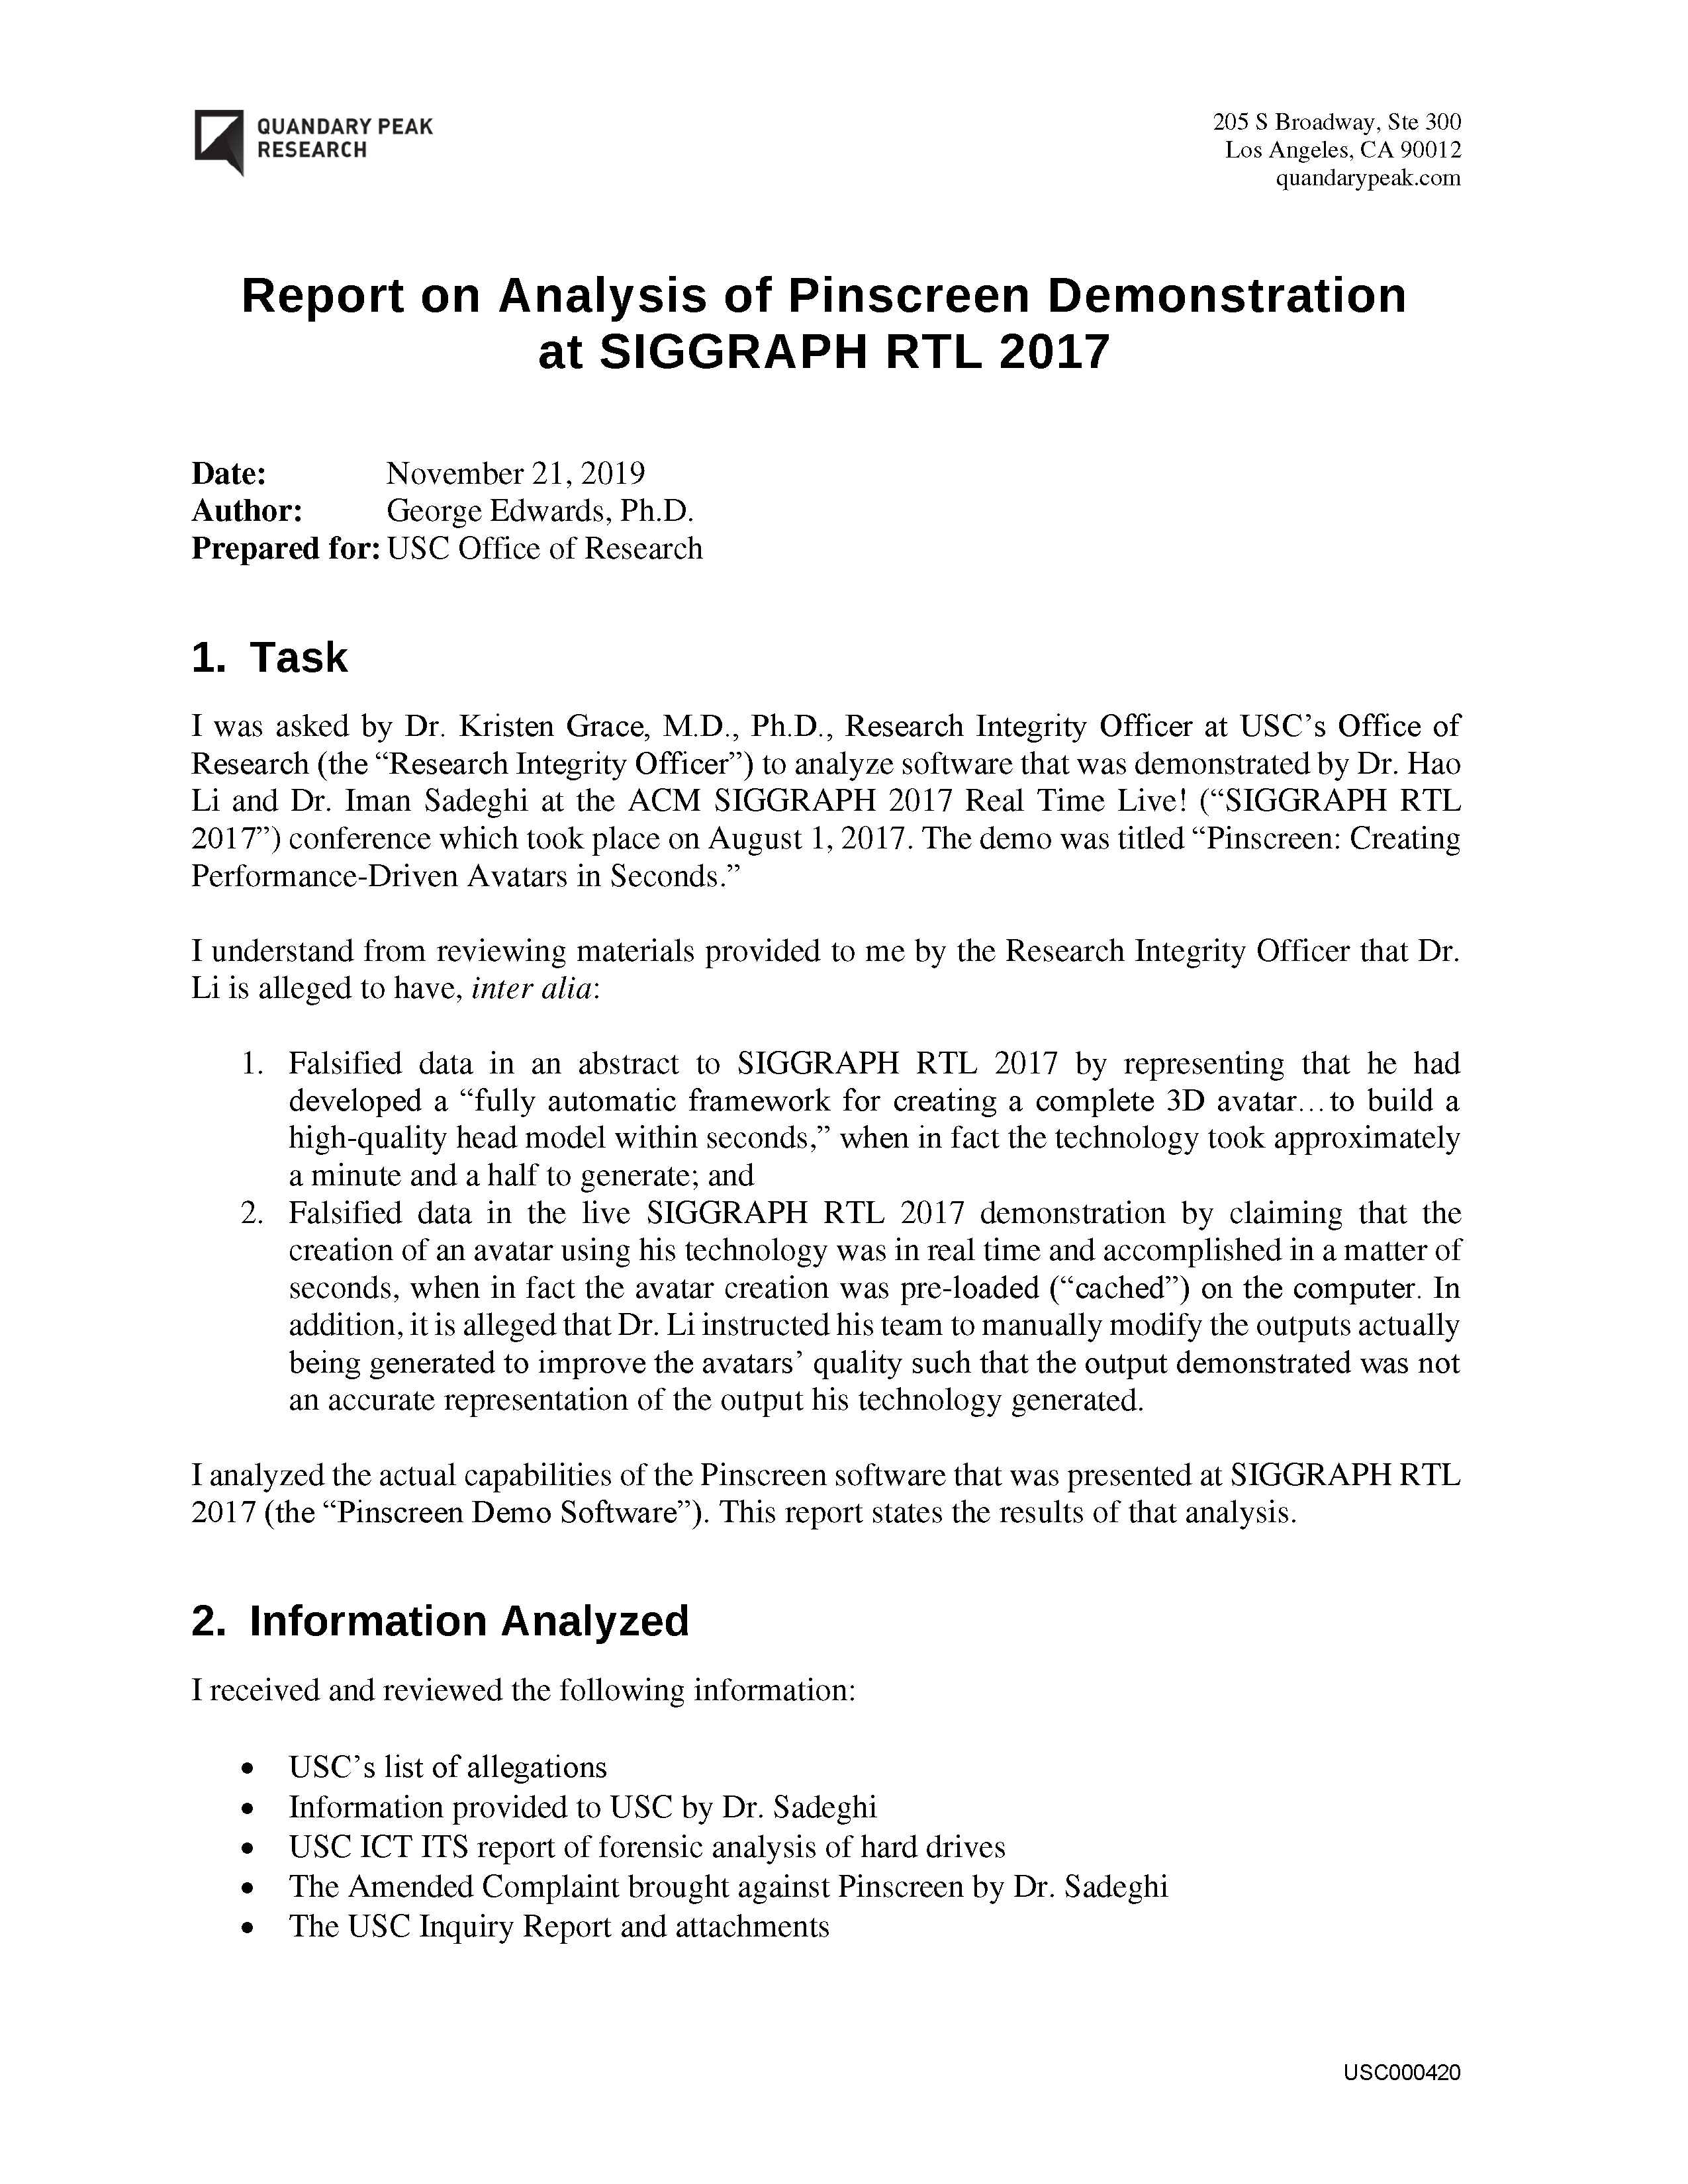 USC's Investigation Report re Hao Li's and Pinscreen's Scientific Misconduct at ACM SIGGRAPH RTL 2017 - Full Report Page 422